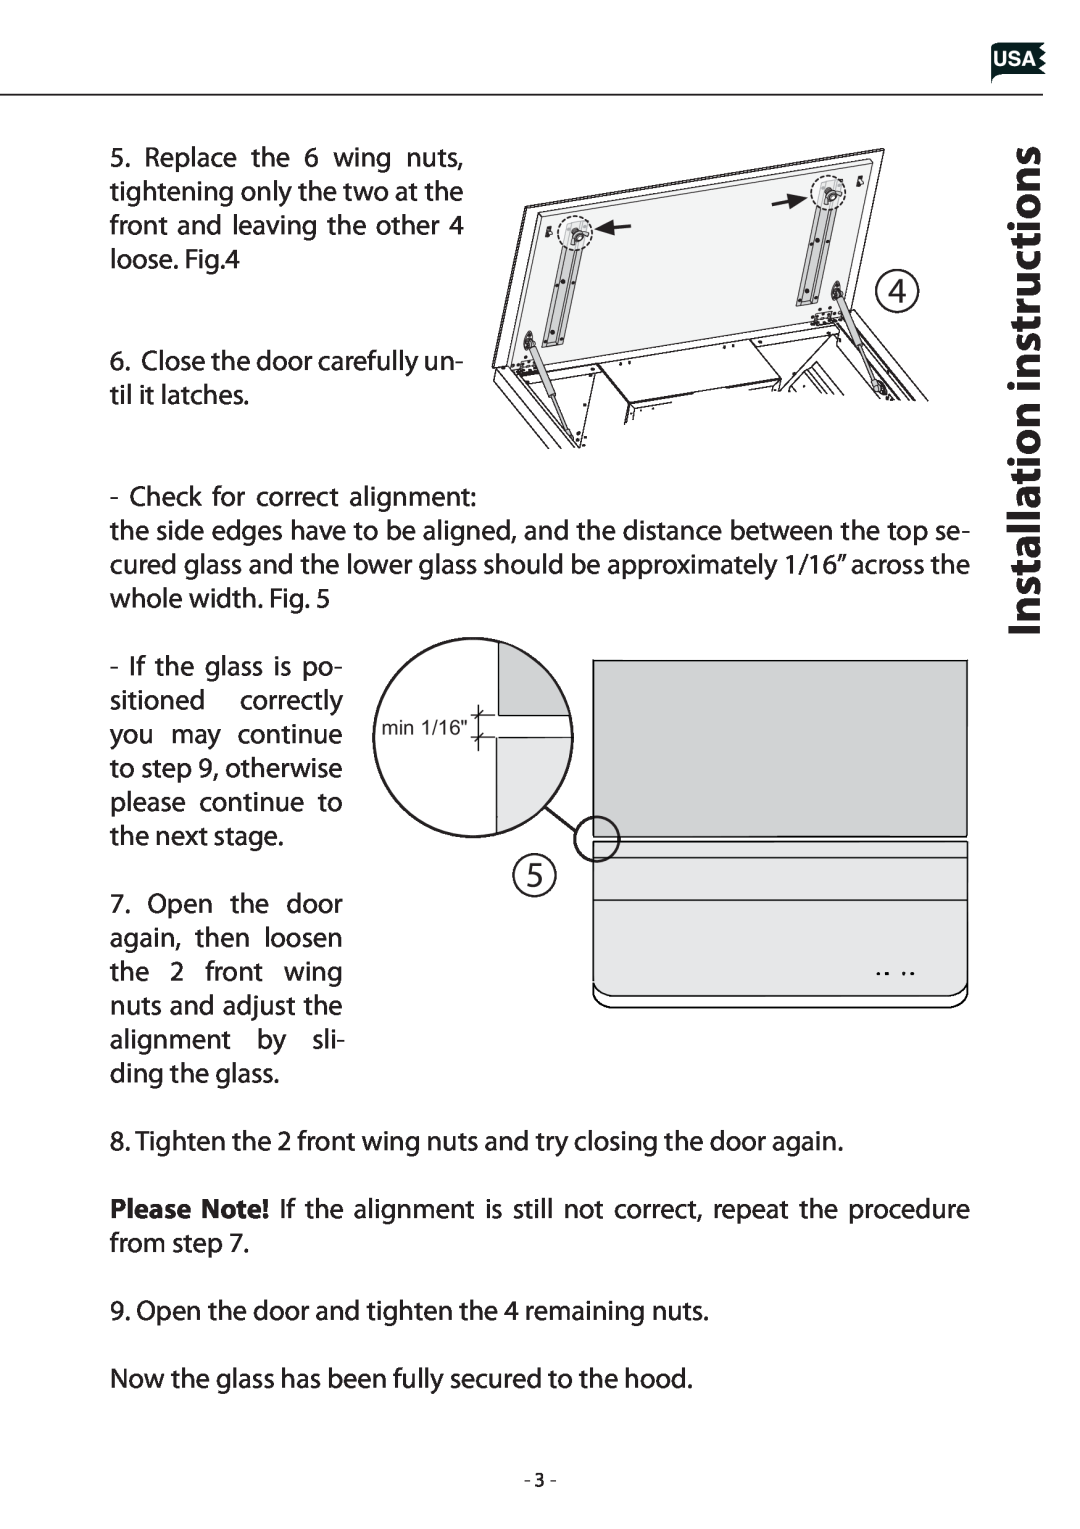 Zephyr AHG-00WH, AHG-00BL manual Installation instructions, Close the door carefully un- til it latches 